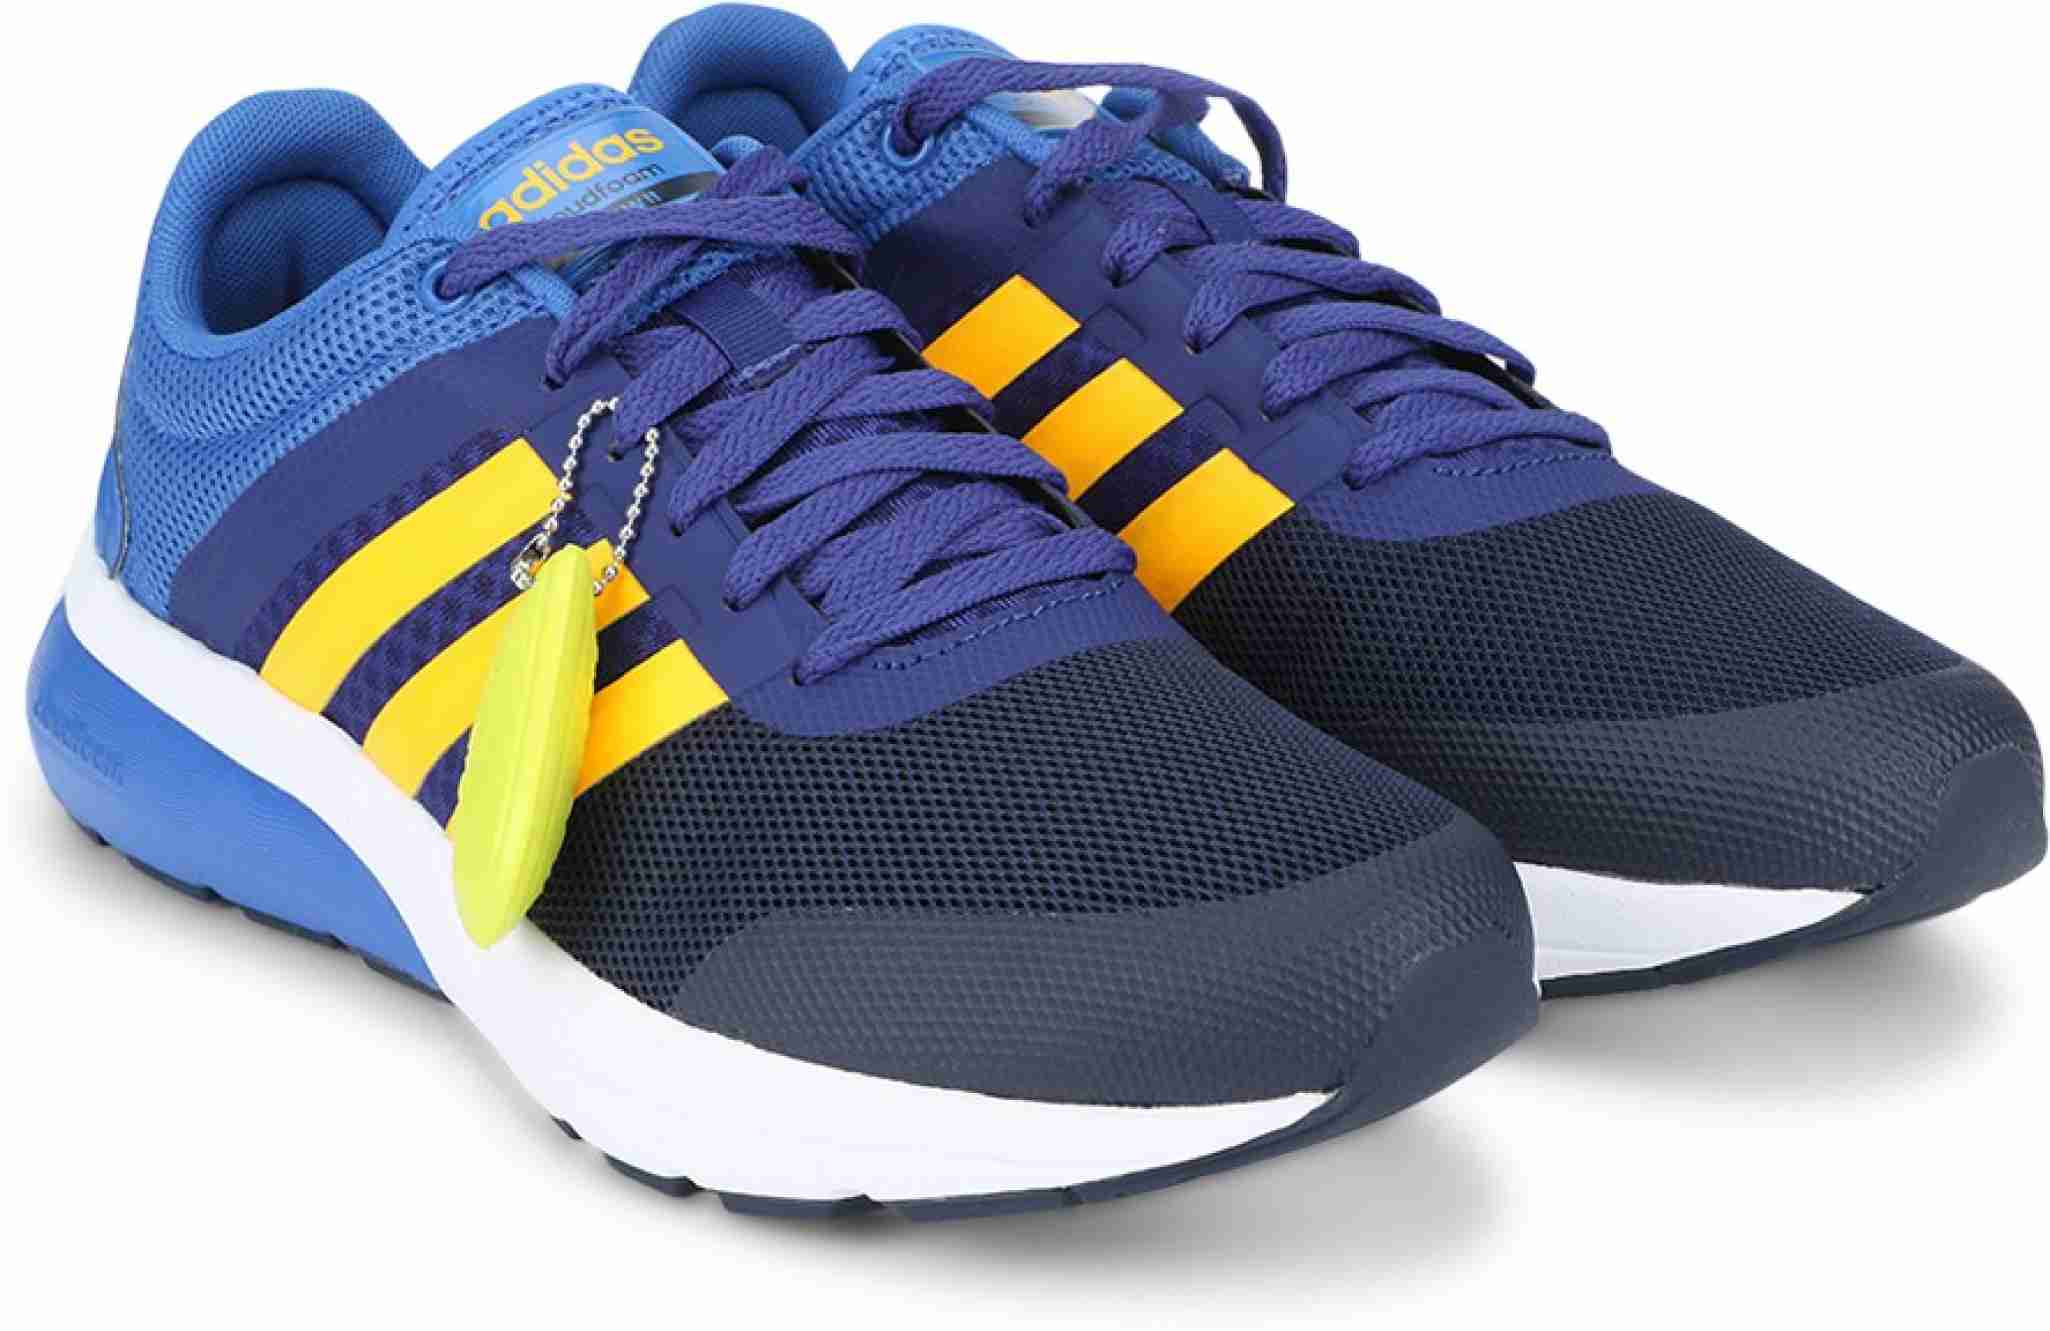 Christchurch Farmacología Anécdota ADIDAS NEO CLOUDFOAM FLOW 2.0 Sneakers For Men - Buy BLUE/SOGOLD/UNIINK  Color ADIDAS NEO CLOUDFOAM FLOW 2.0 Sneakers For Men Online at Best Price -  Shop Online for Footwears in India | Shopsy.in